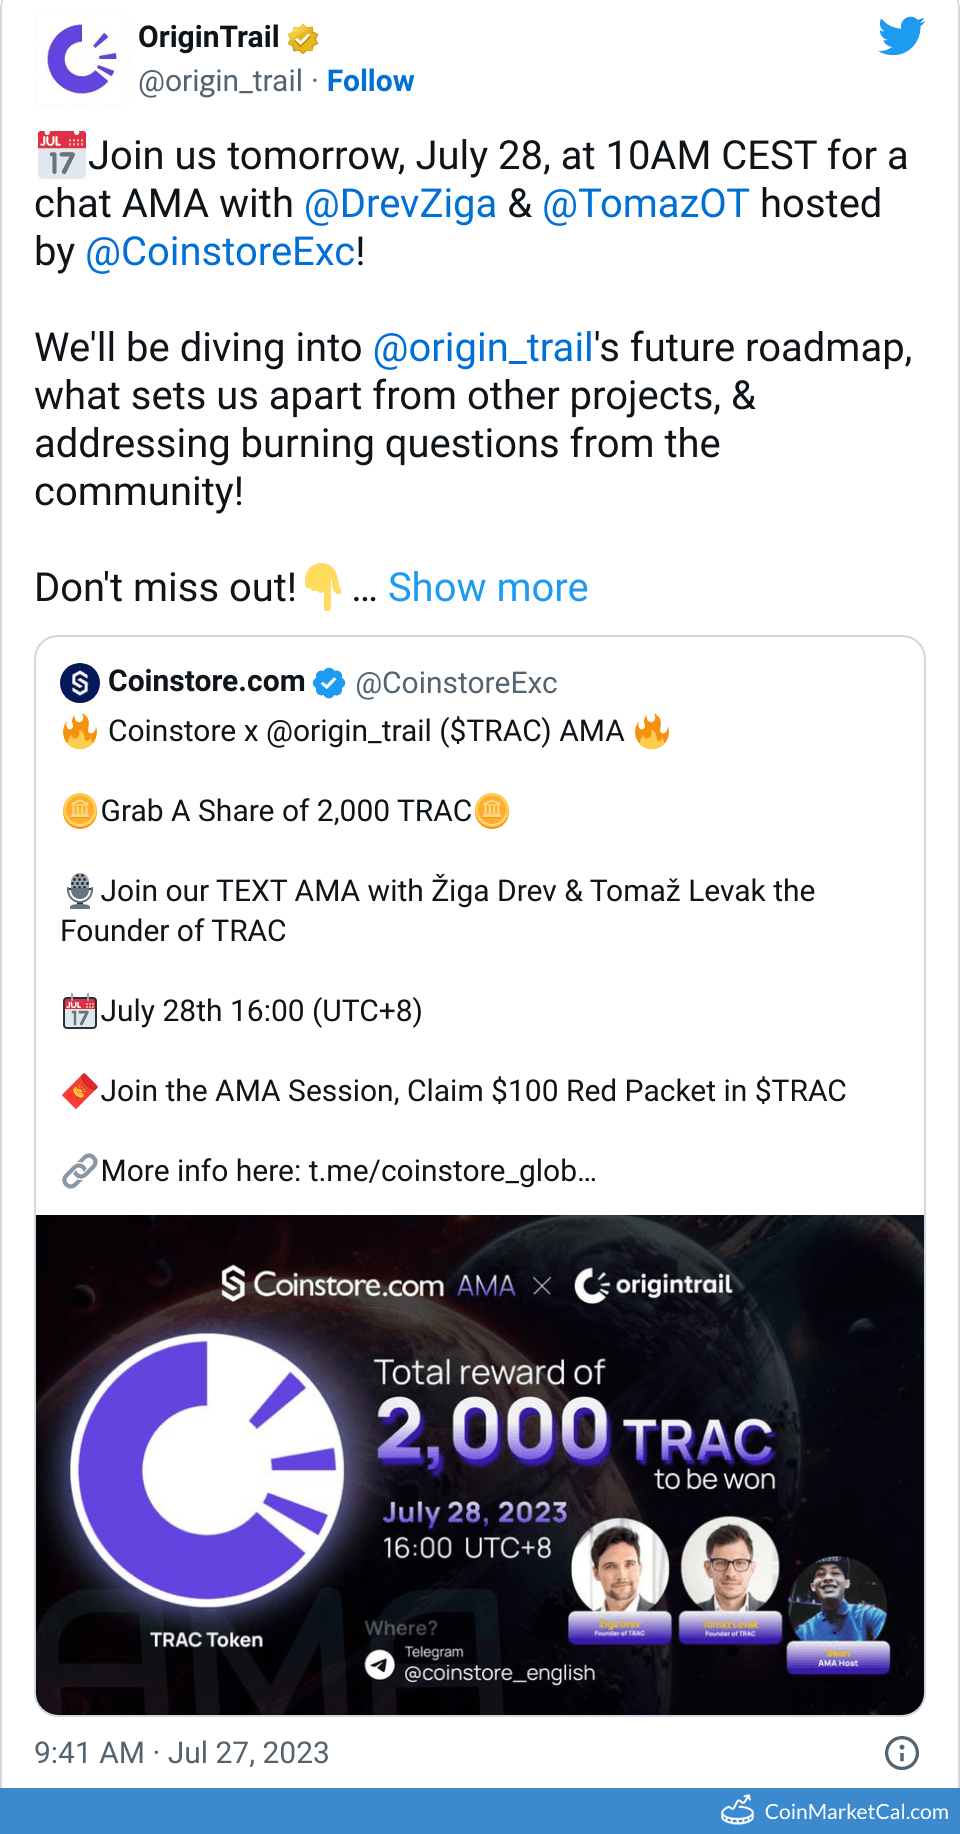 AMA with Coinstore image